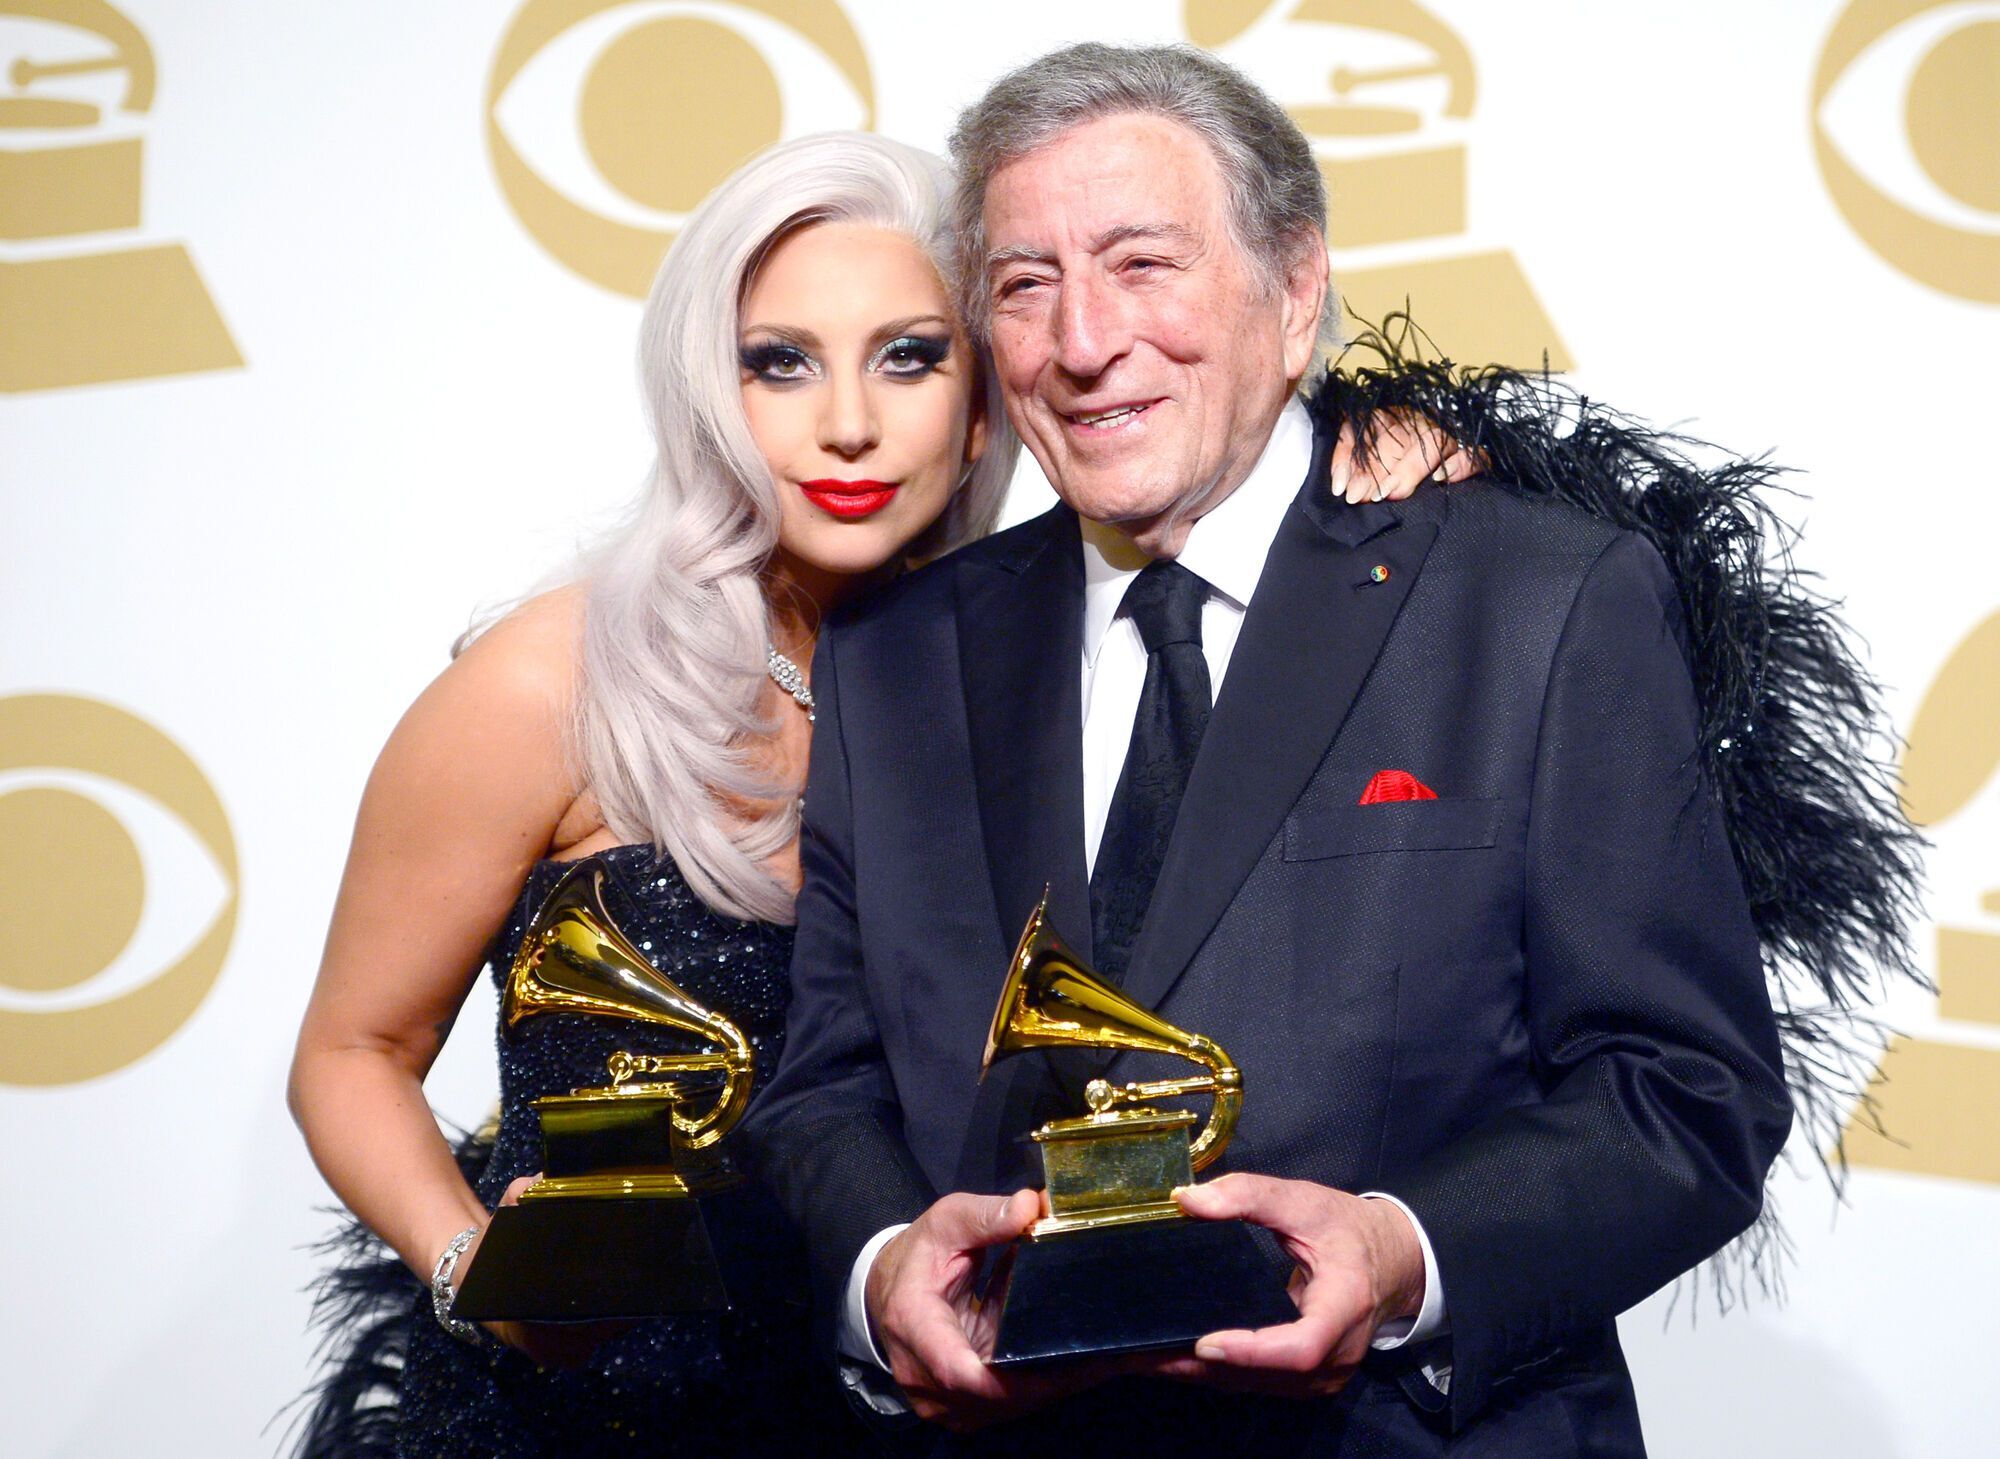 Legendary singer Tony Bennett, who became the oldest author on the Billboard chart, dies at 96